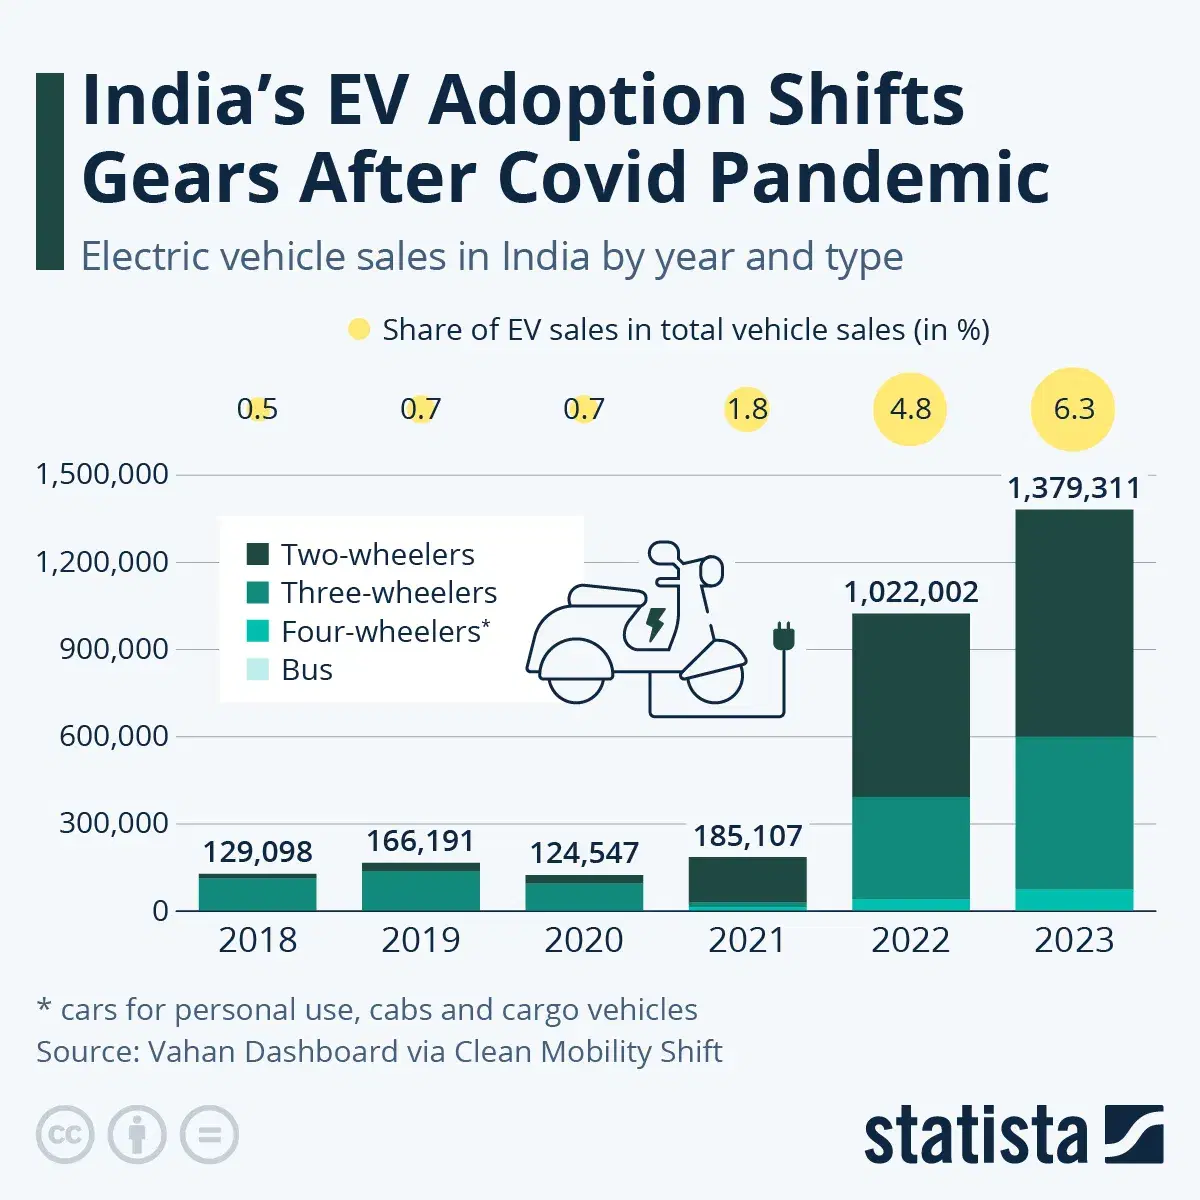 How Many EVs Are Sold in India?